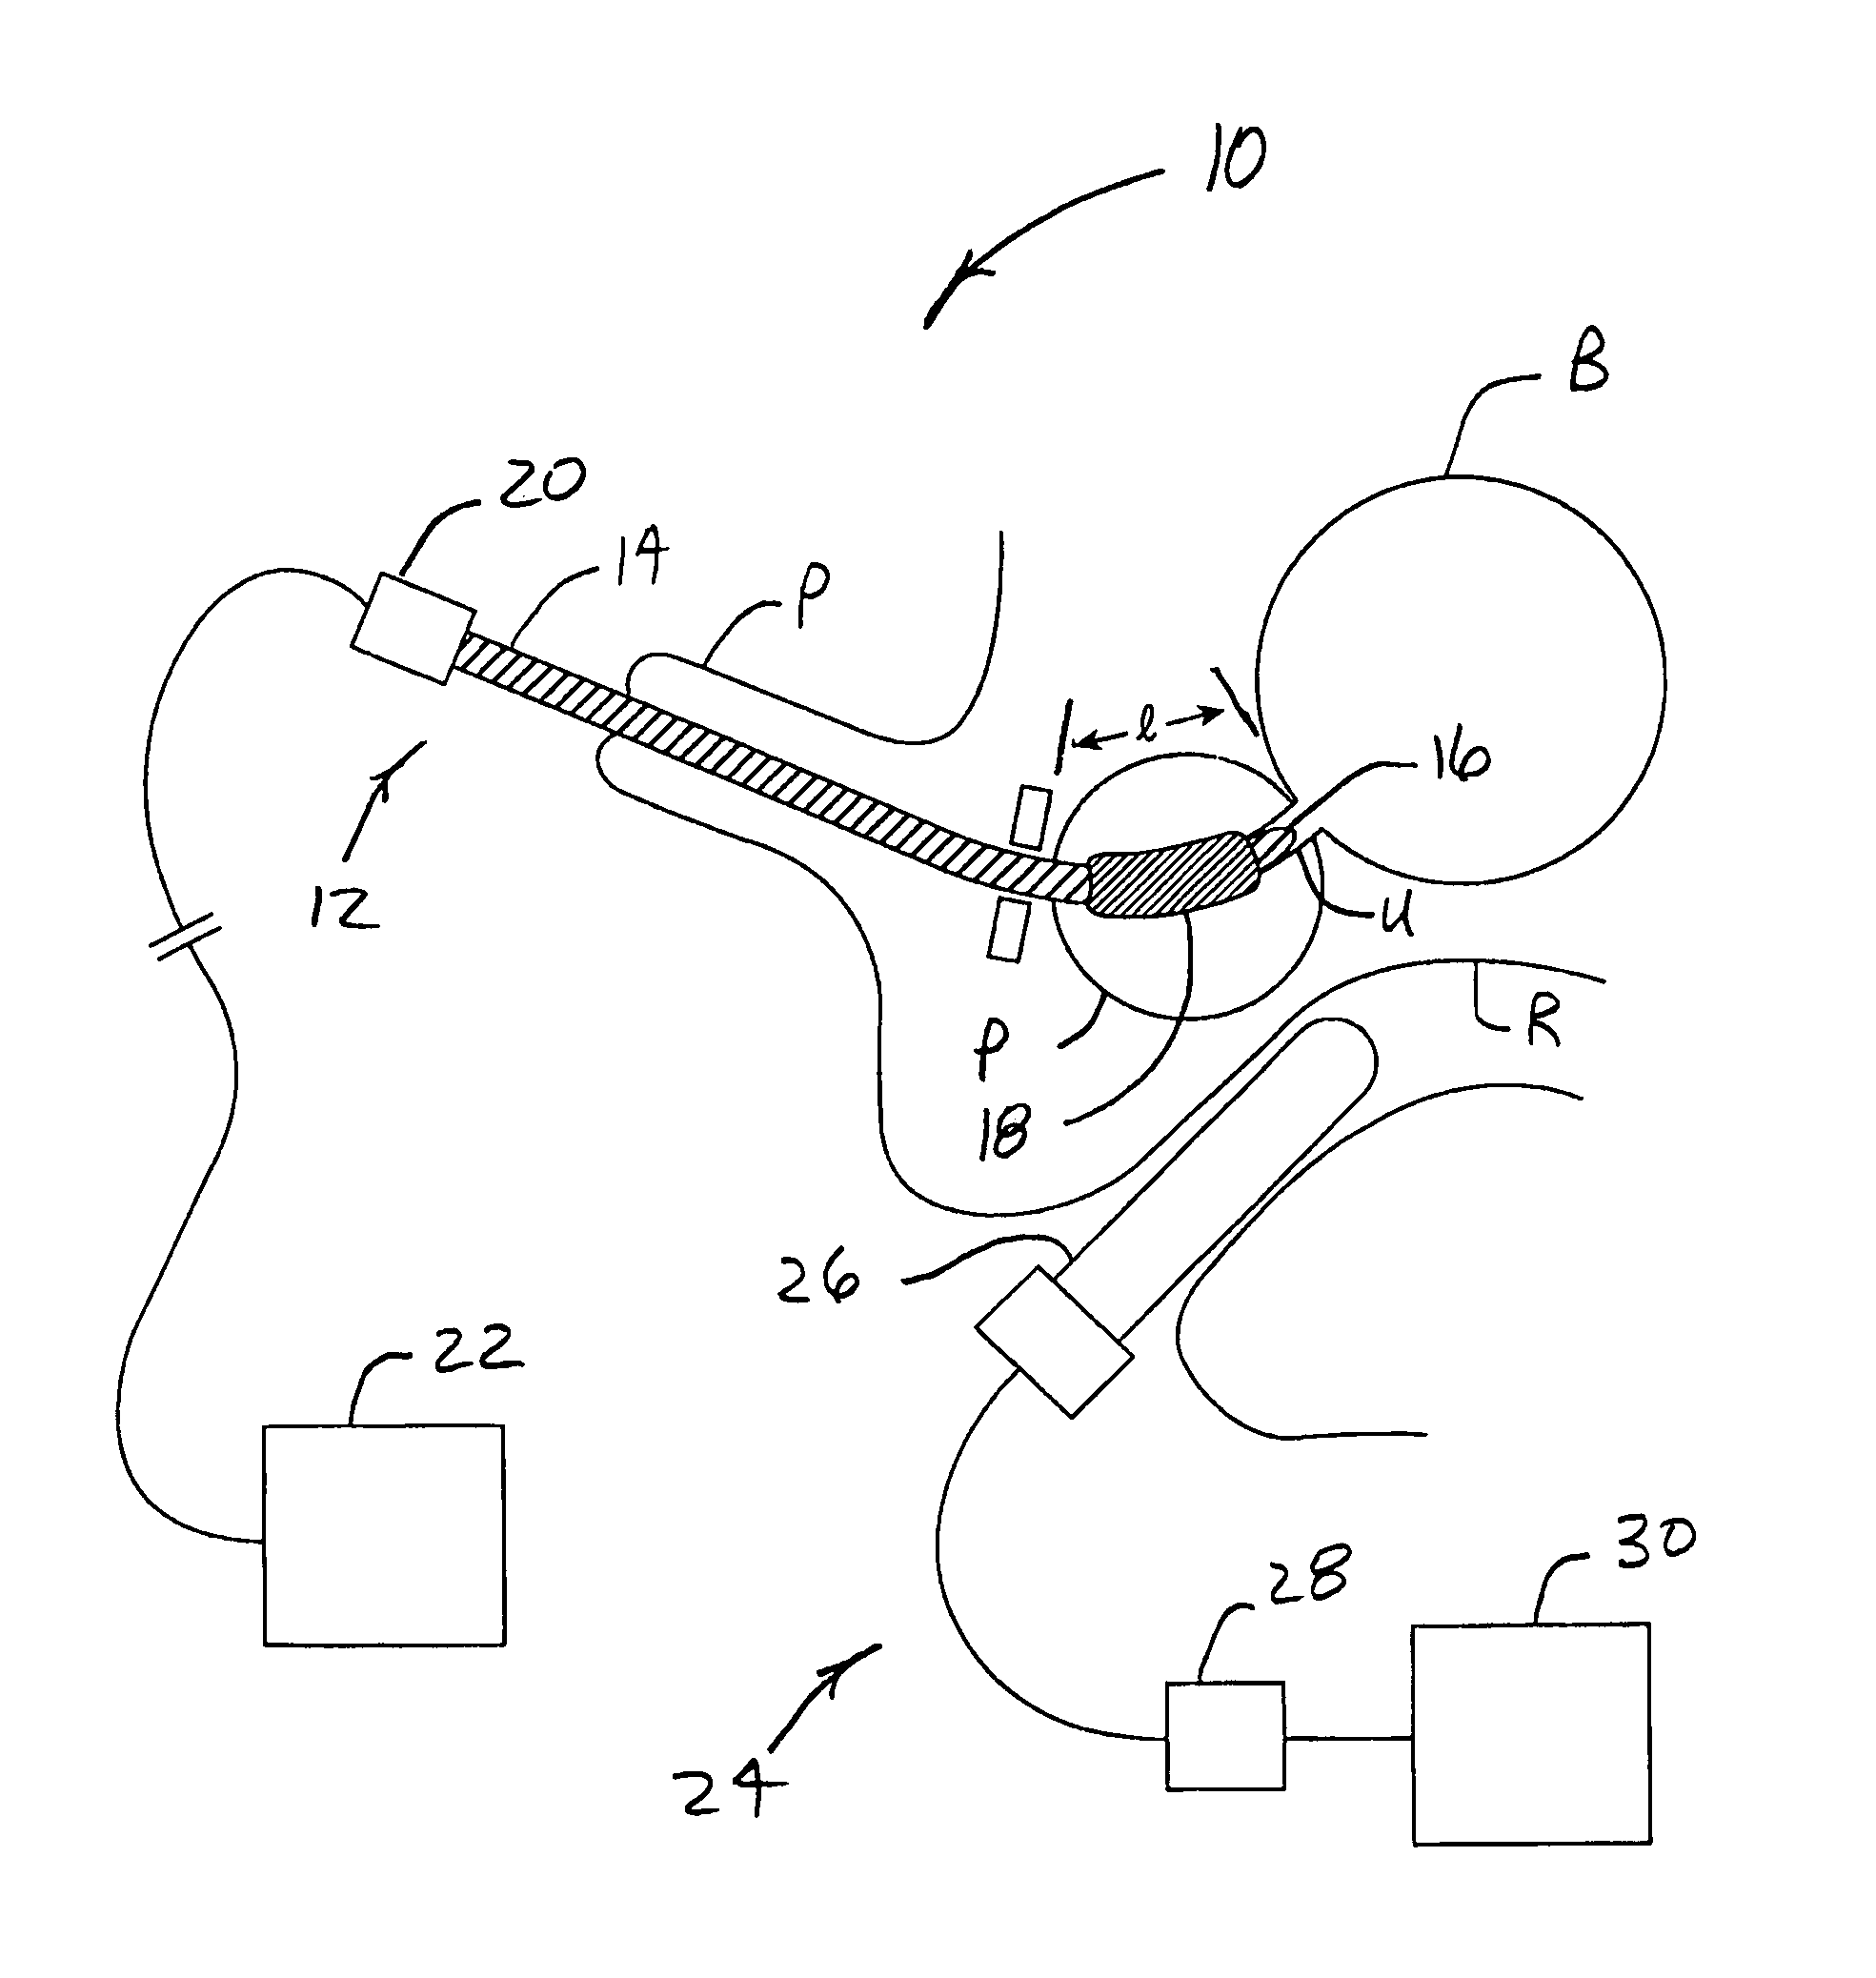 Transurethral systems and methods for ablation treatment of prostate tissue